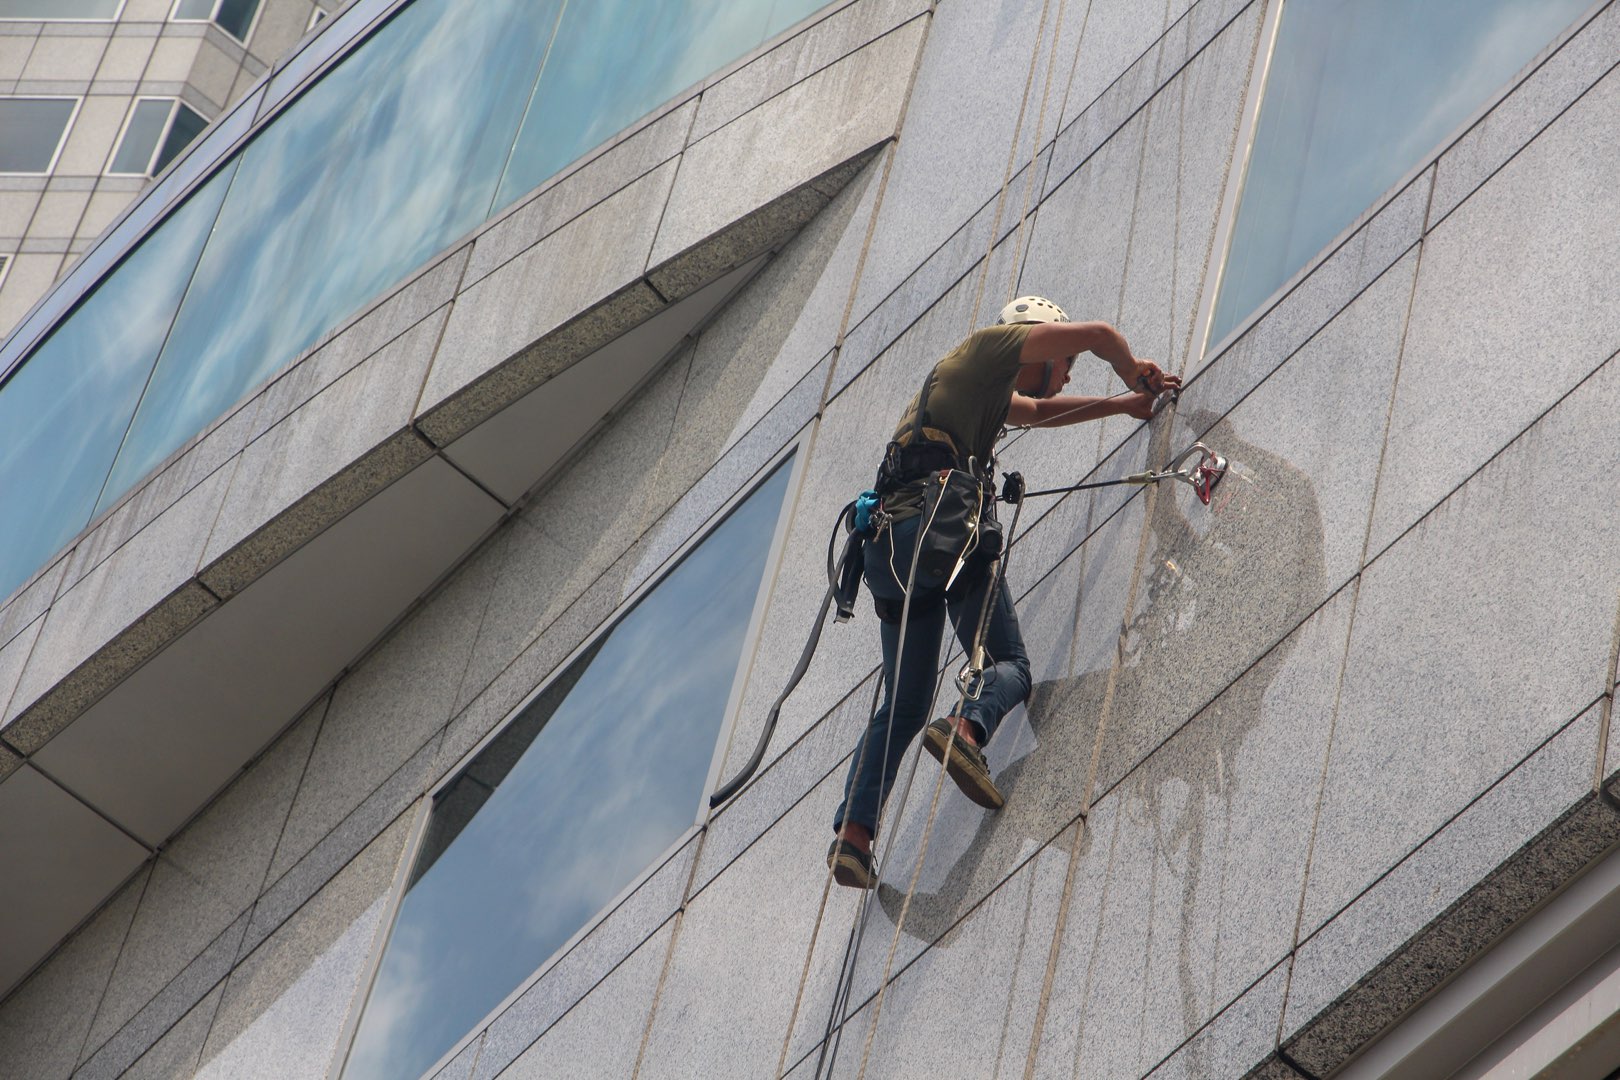 A window washer scales the outside of a building. Progressive Building Services also includes window cleaning.